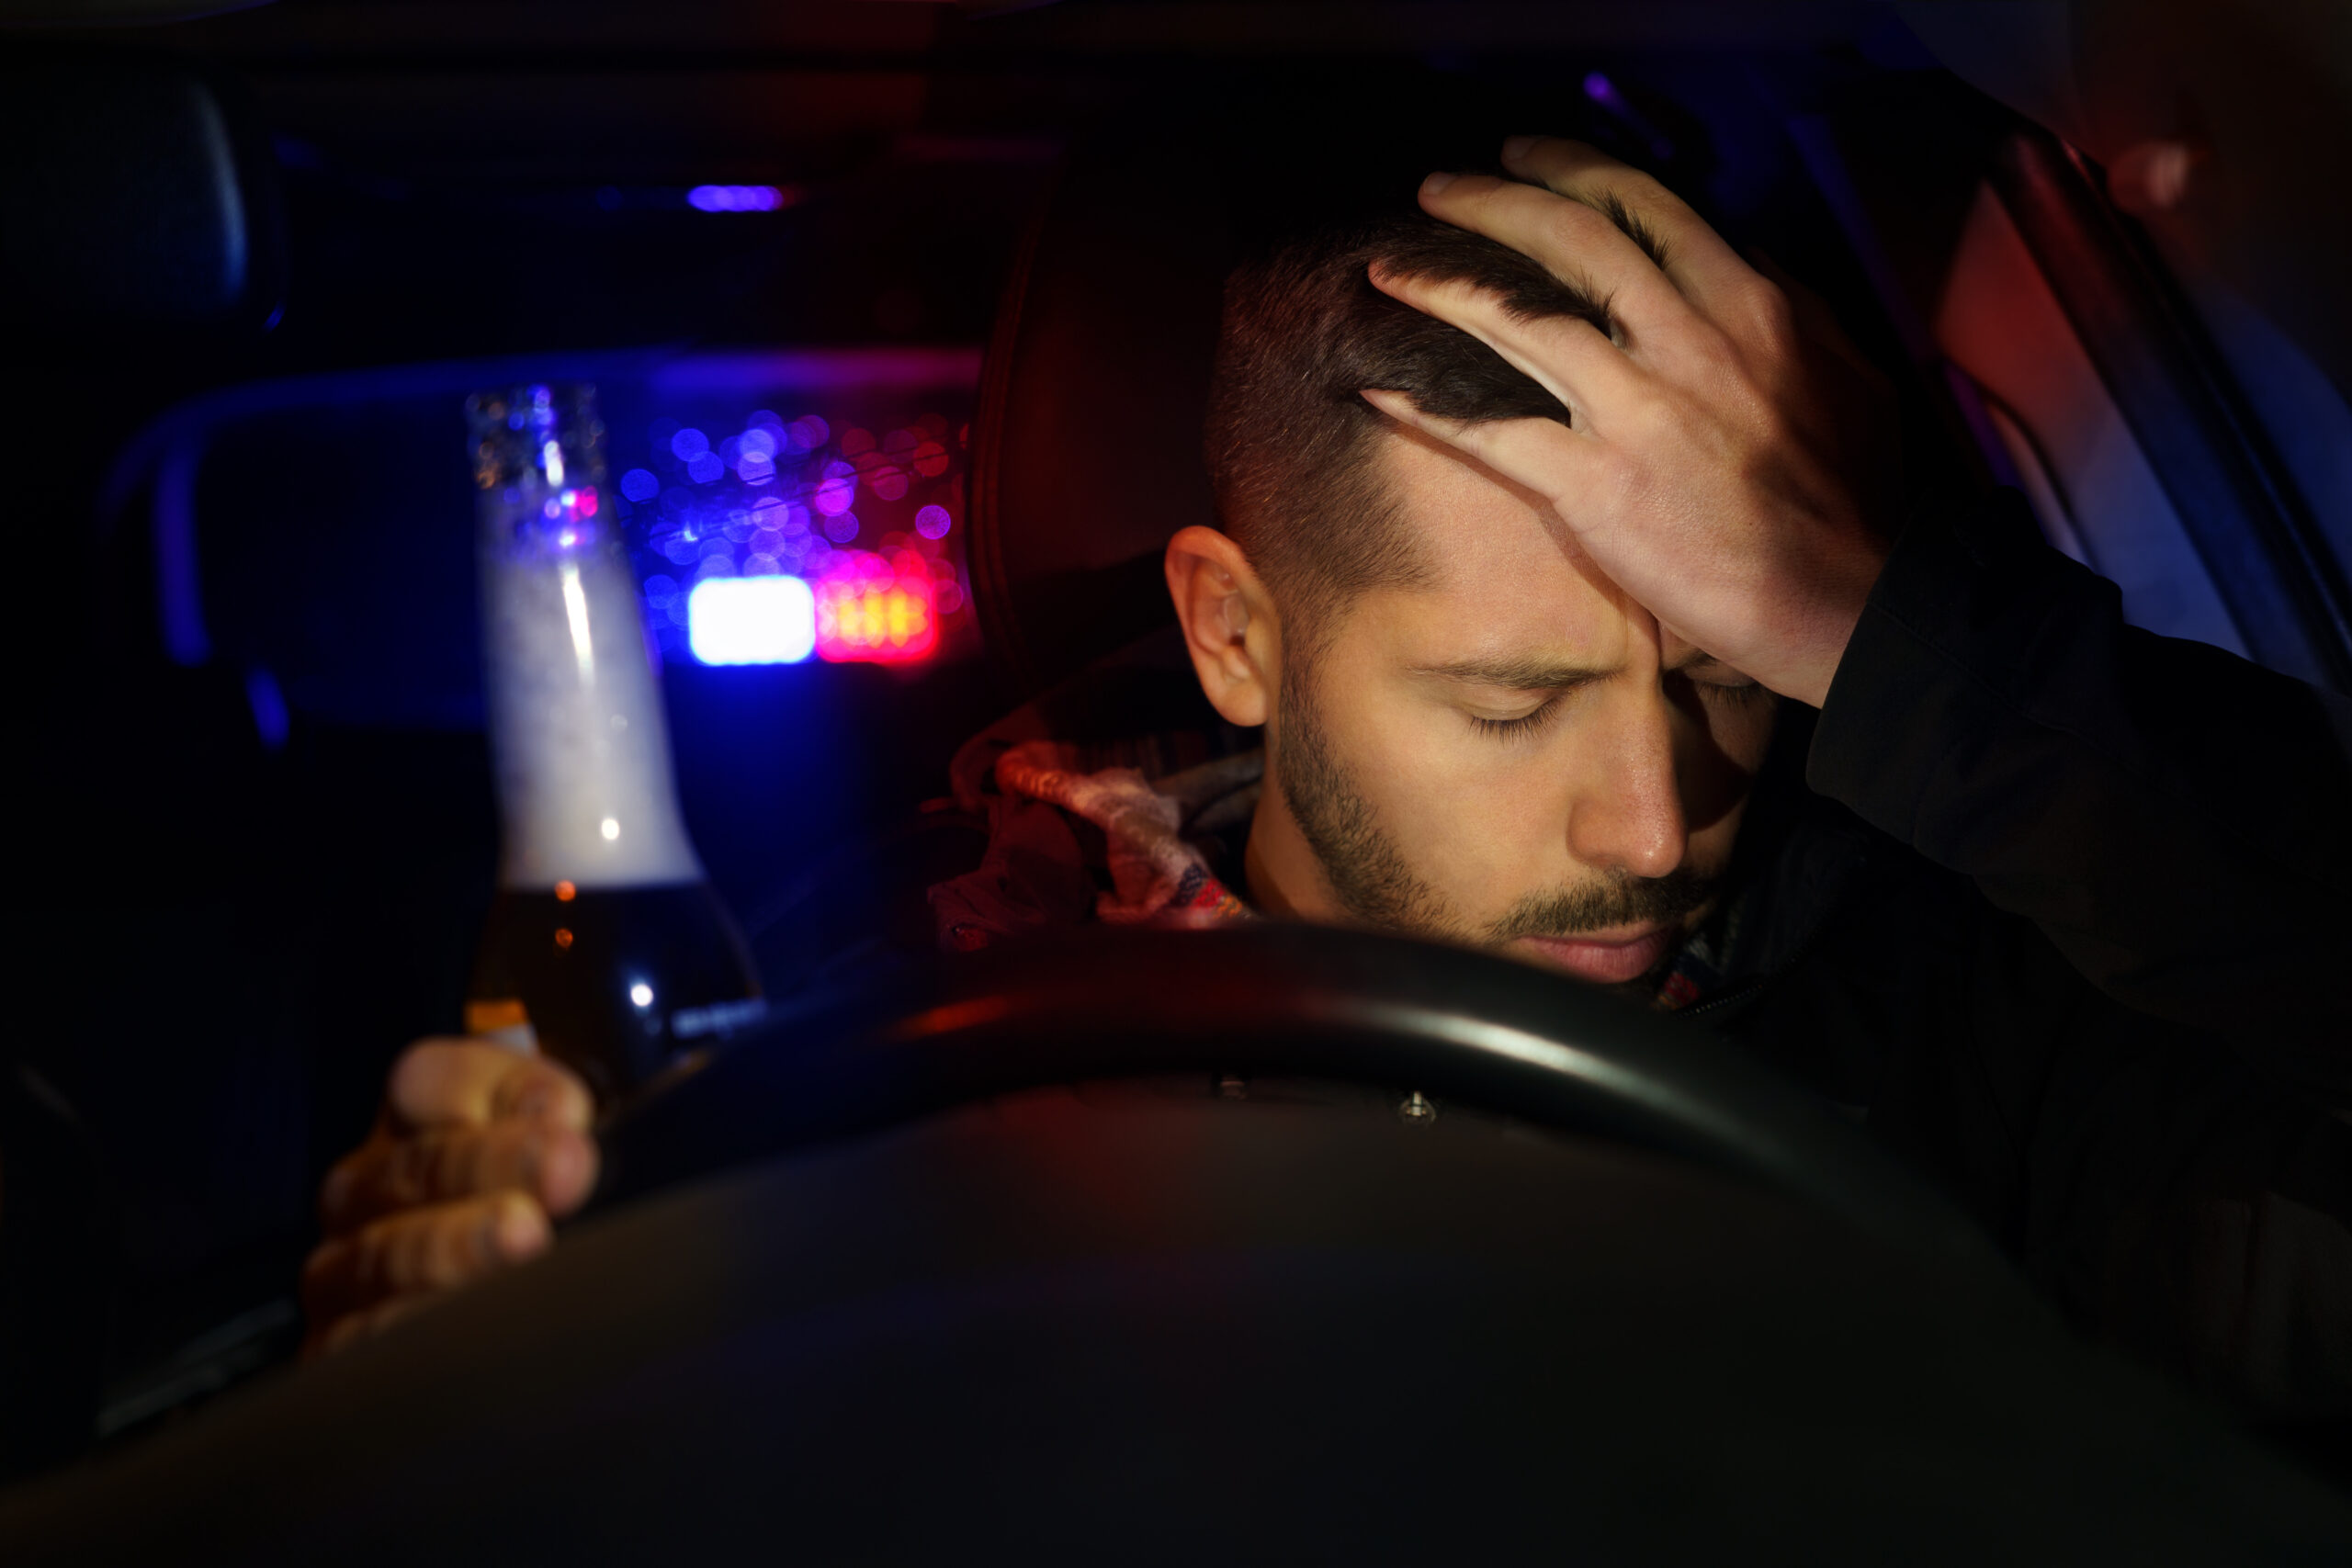 increase of DUI over the holiday